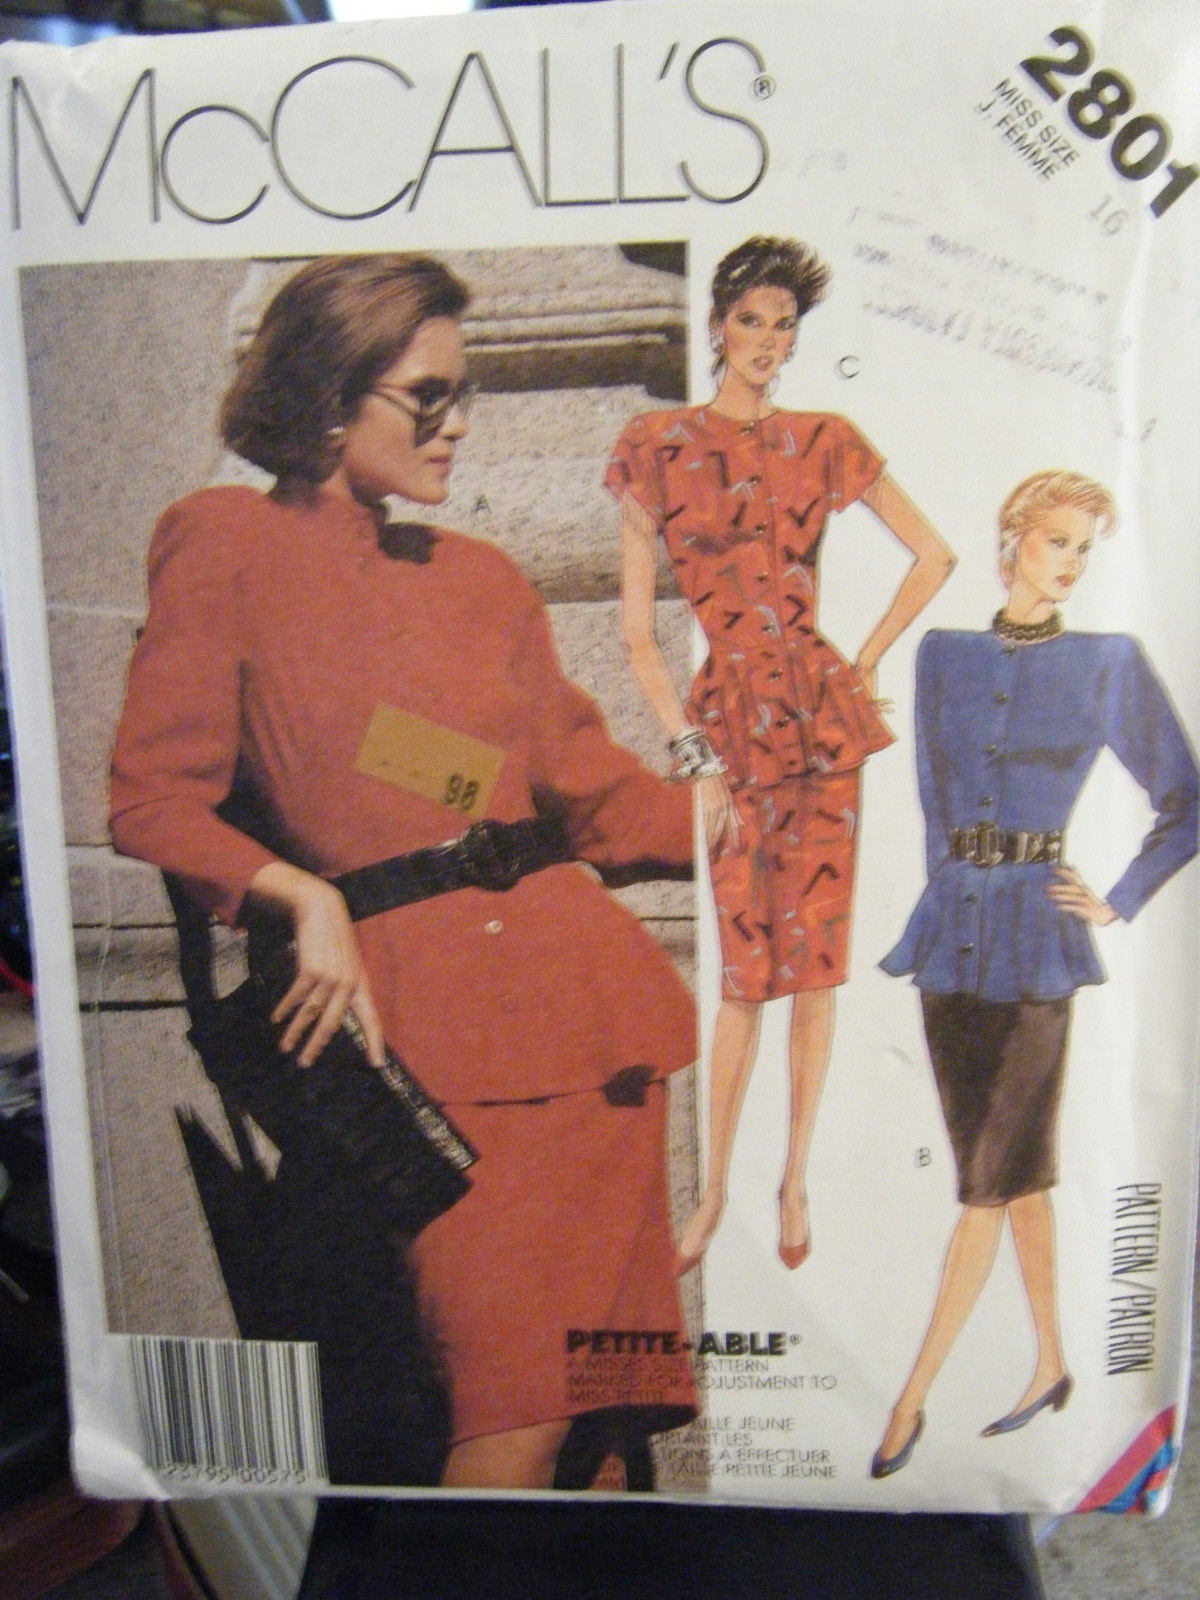 Primary image for McCall's 2801 Misses Peplum Top & Skirt Pattern - Size 16 Bust 38